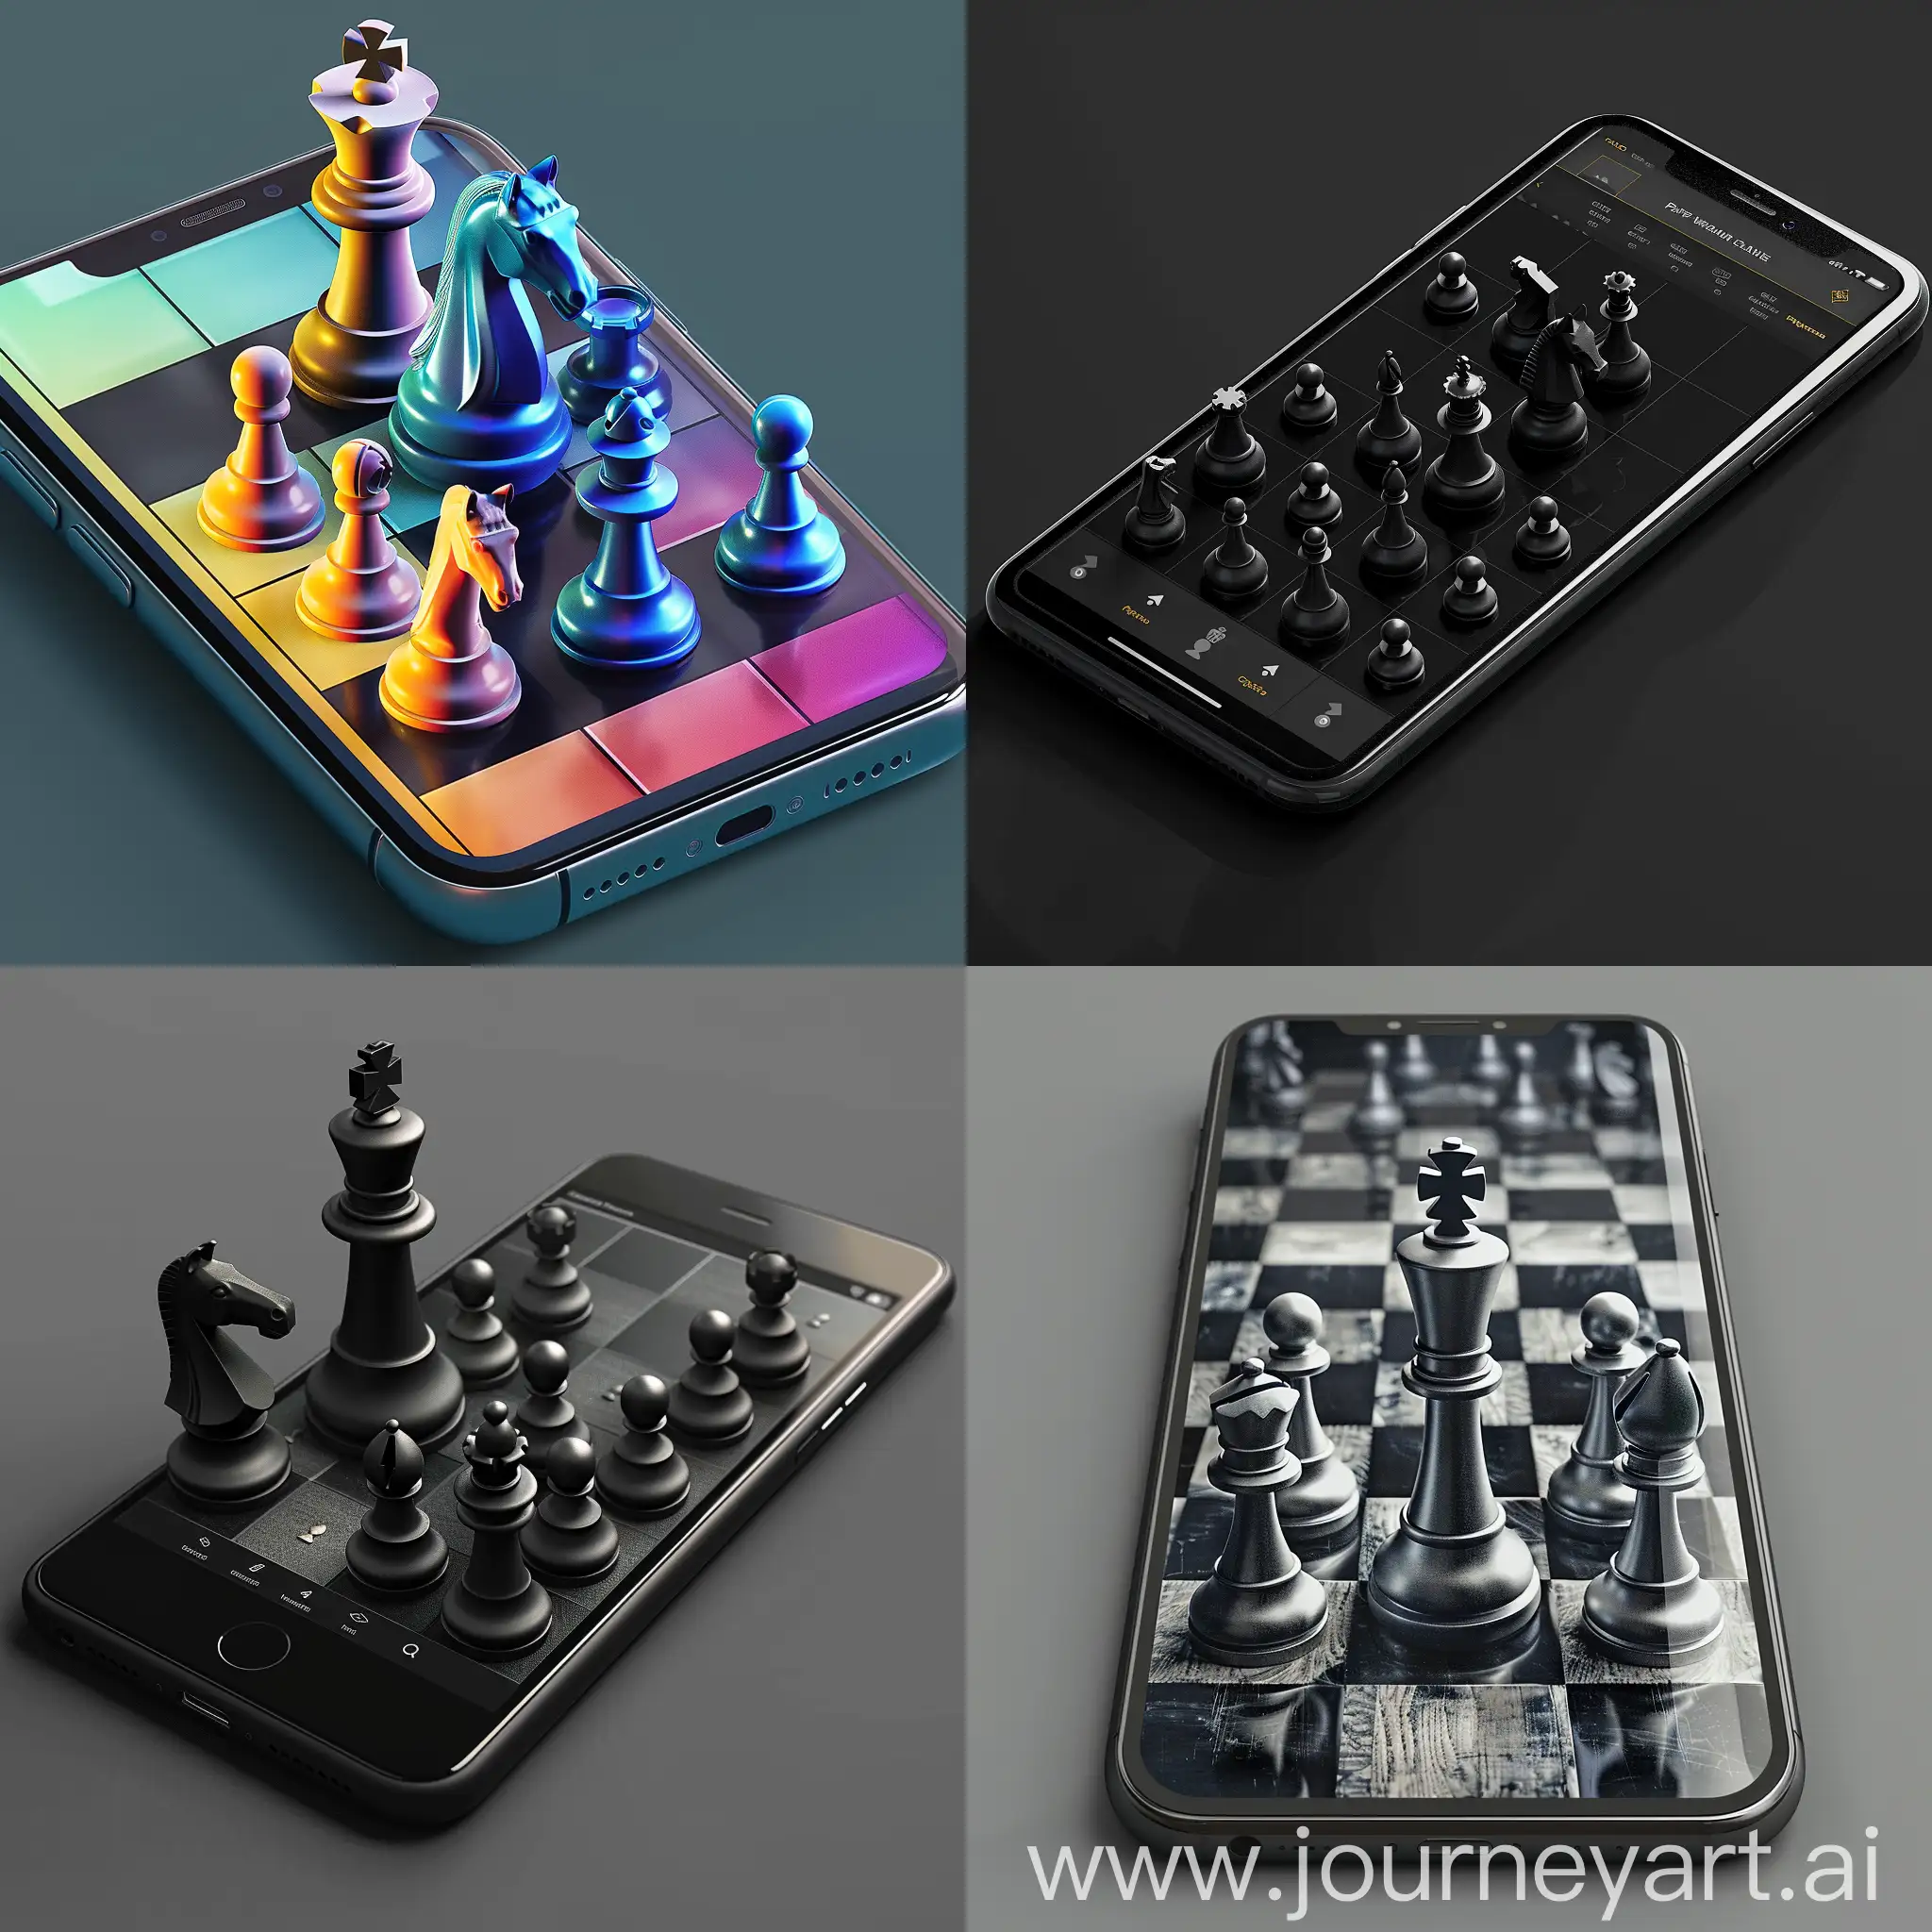 Mobile-Chess-Application-Design-with-Modern-Interface-and-AR-Integration